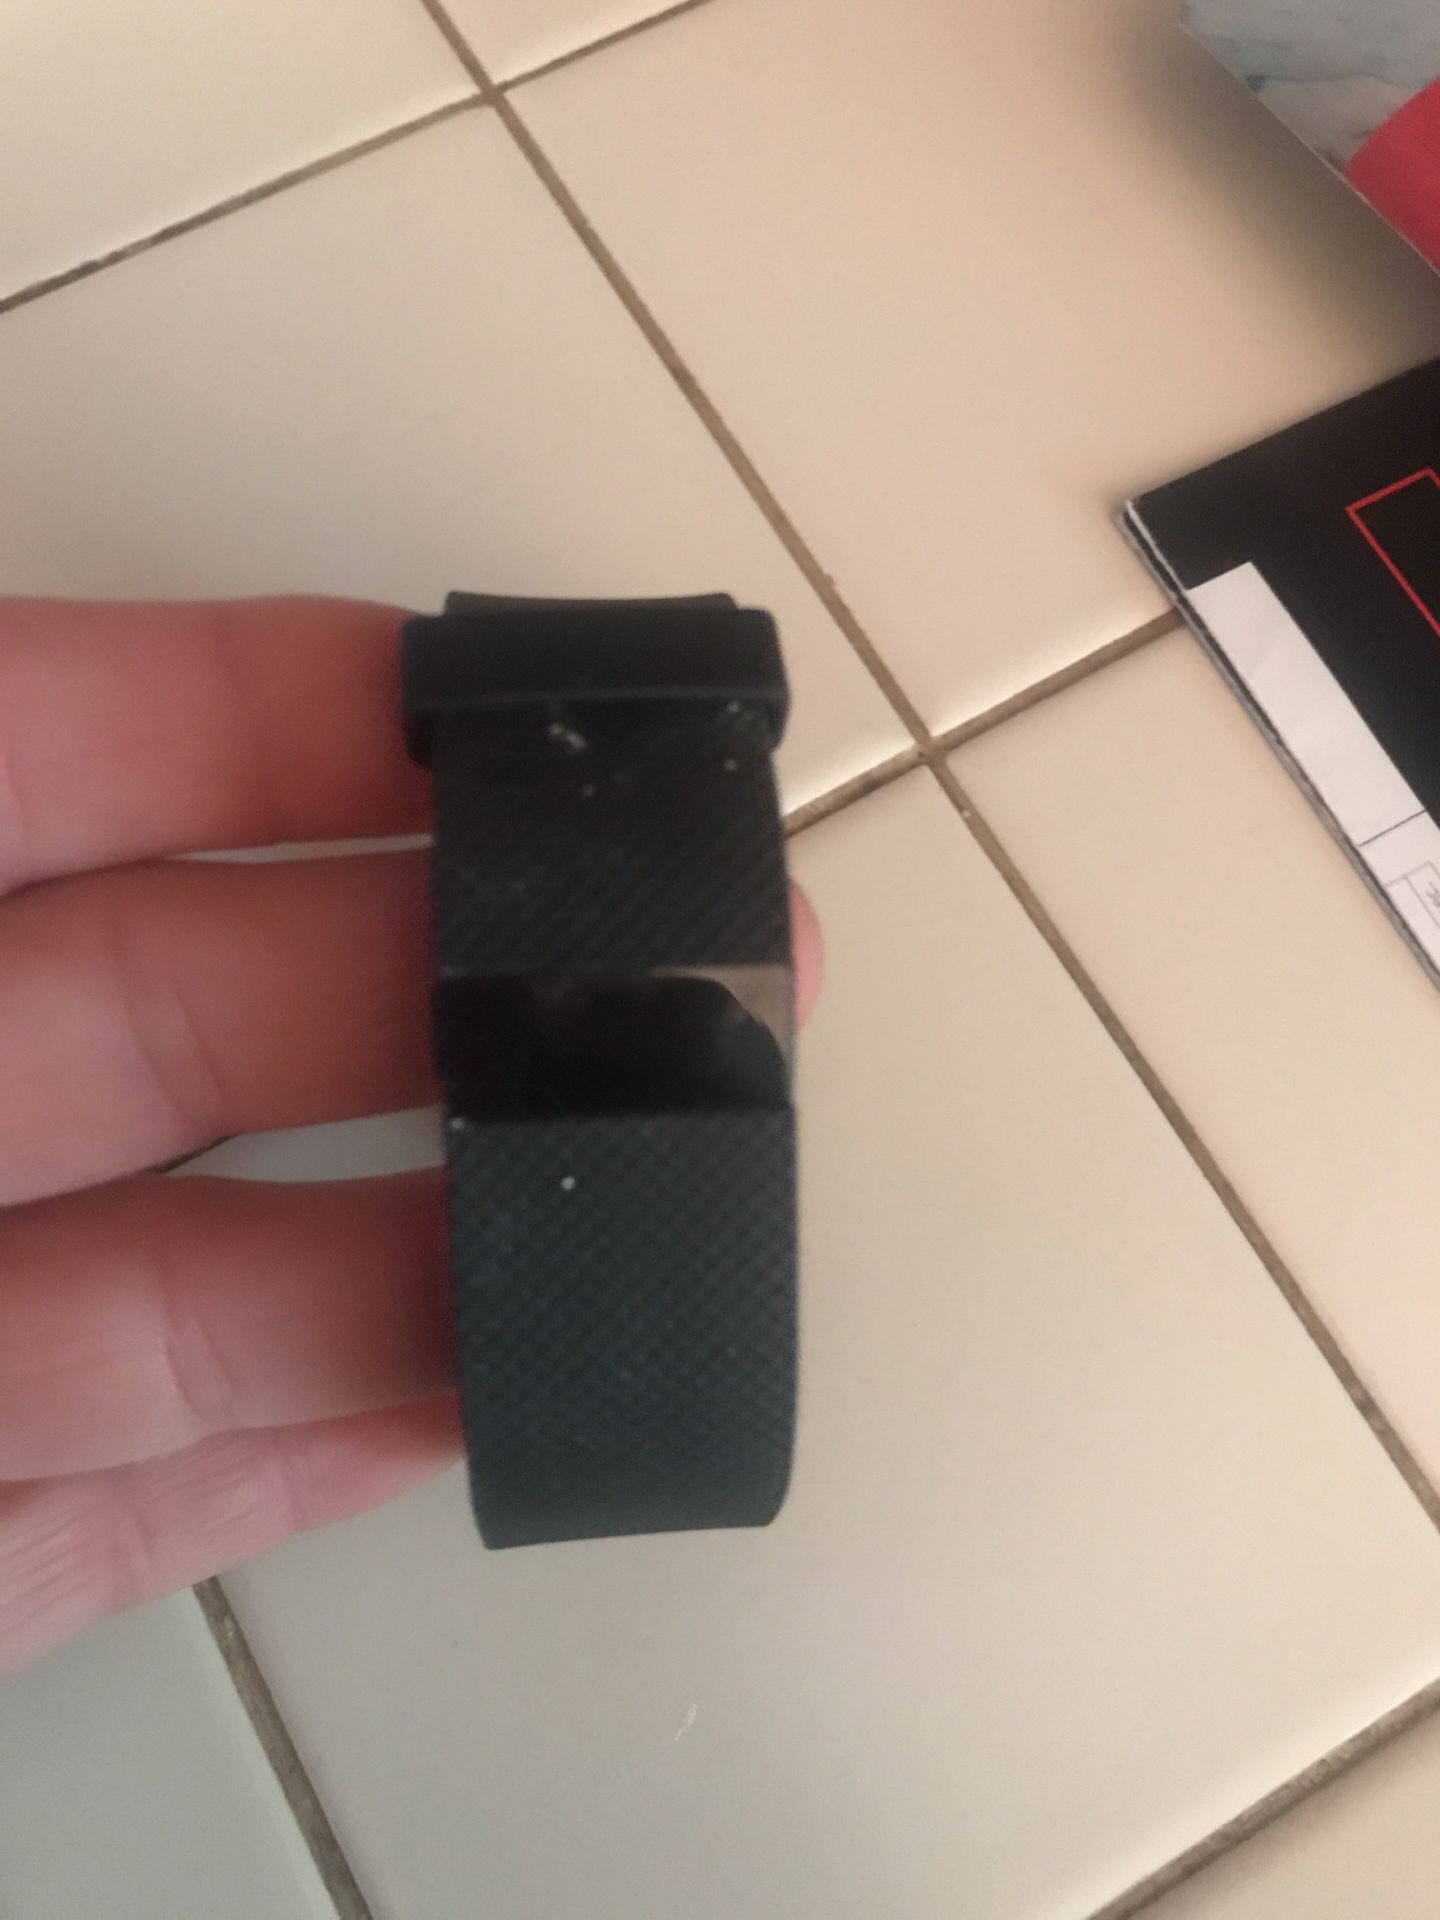 Fitbit $25 works